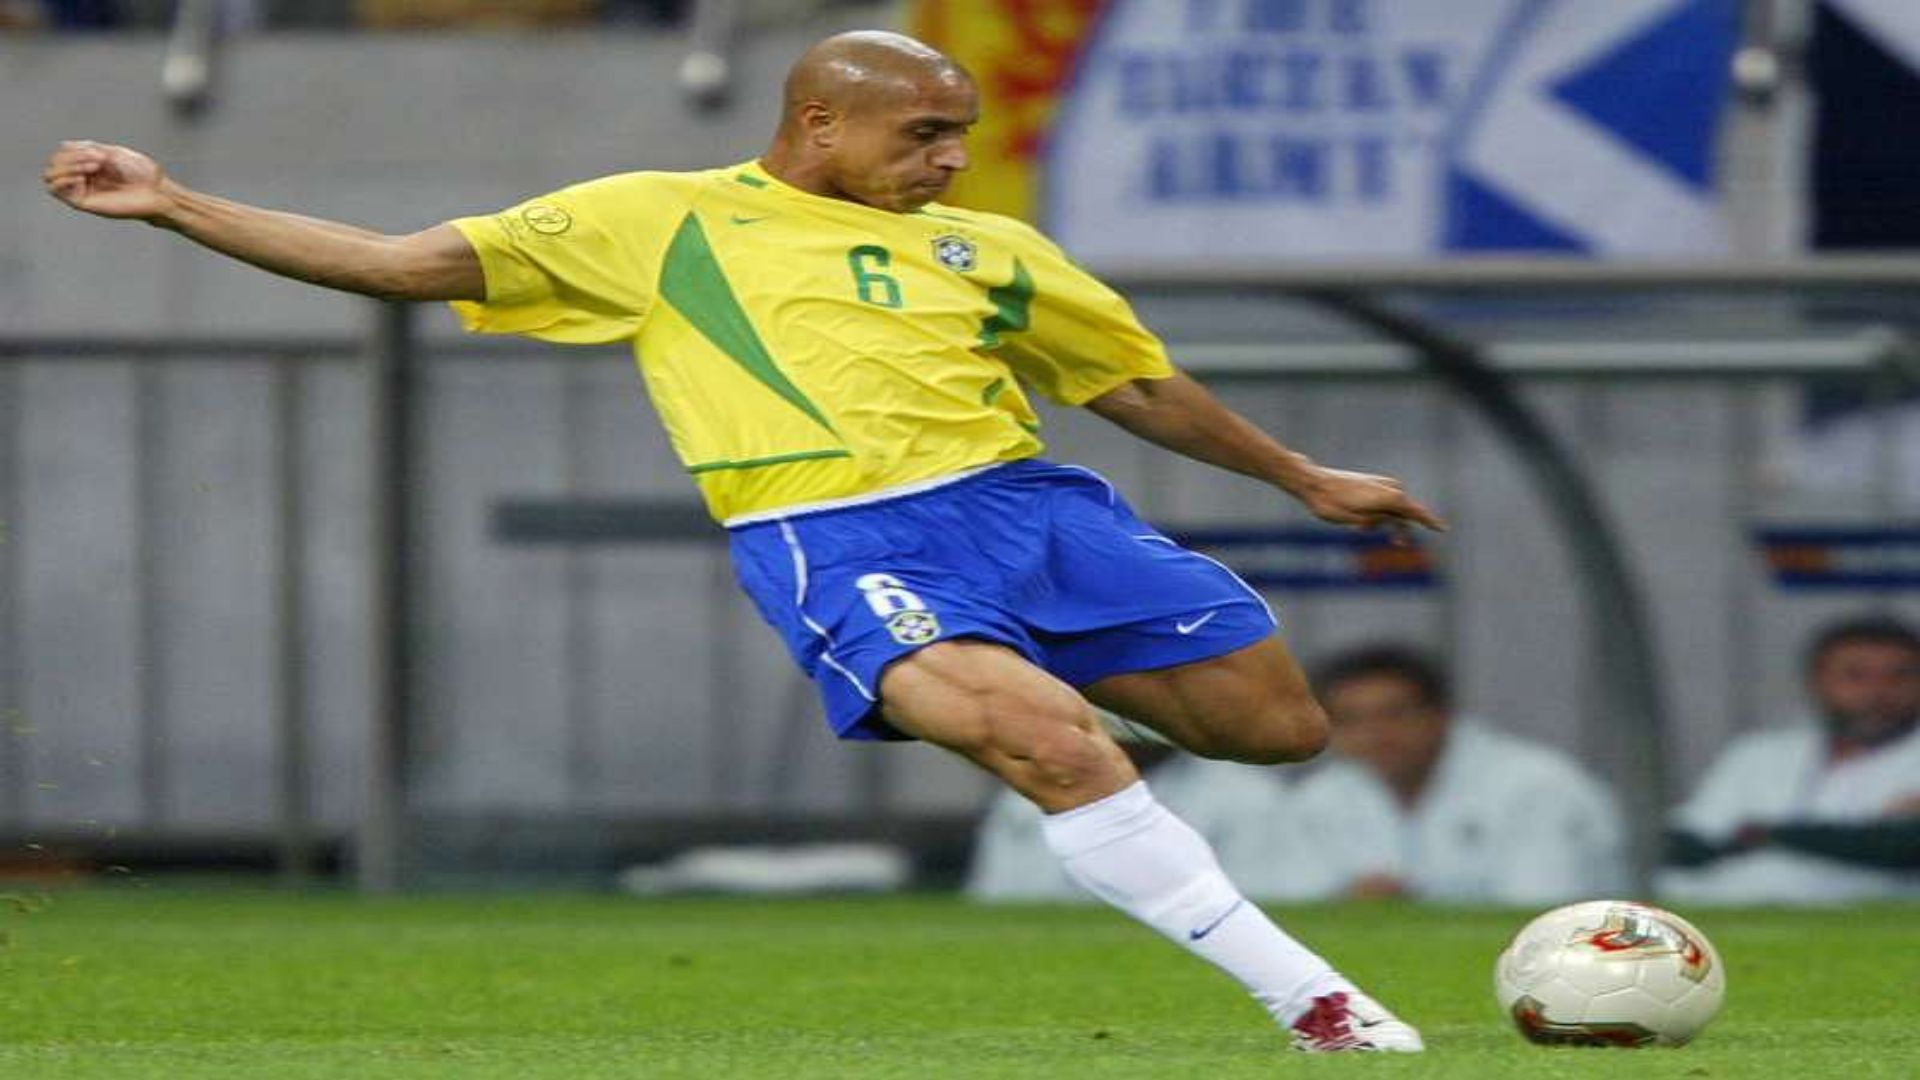 Roberto Carlos was blessed with a cannon of a left foot.